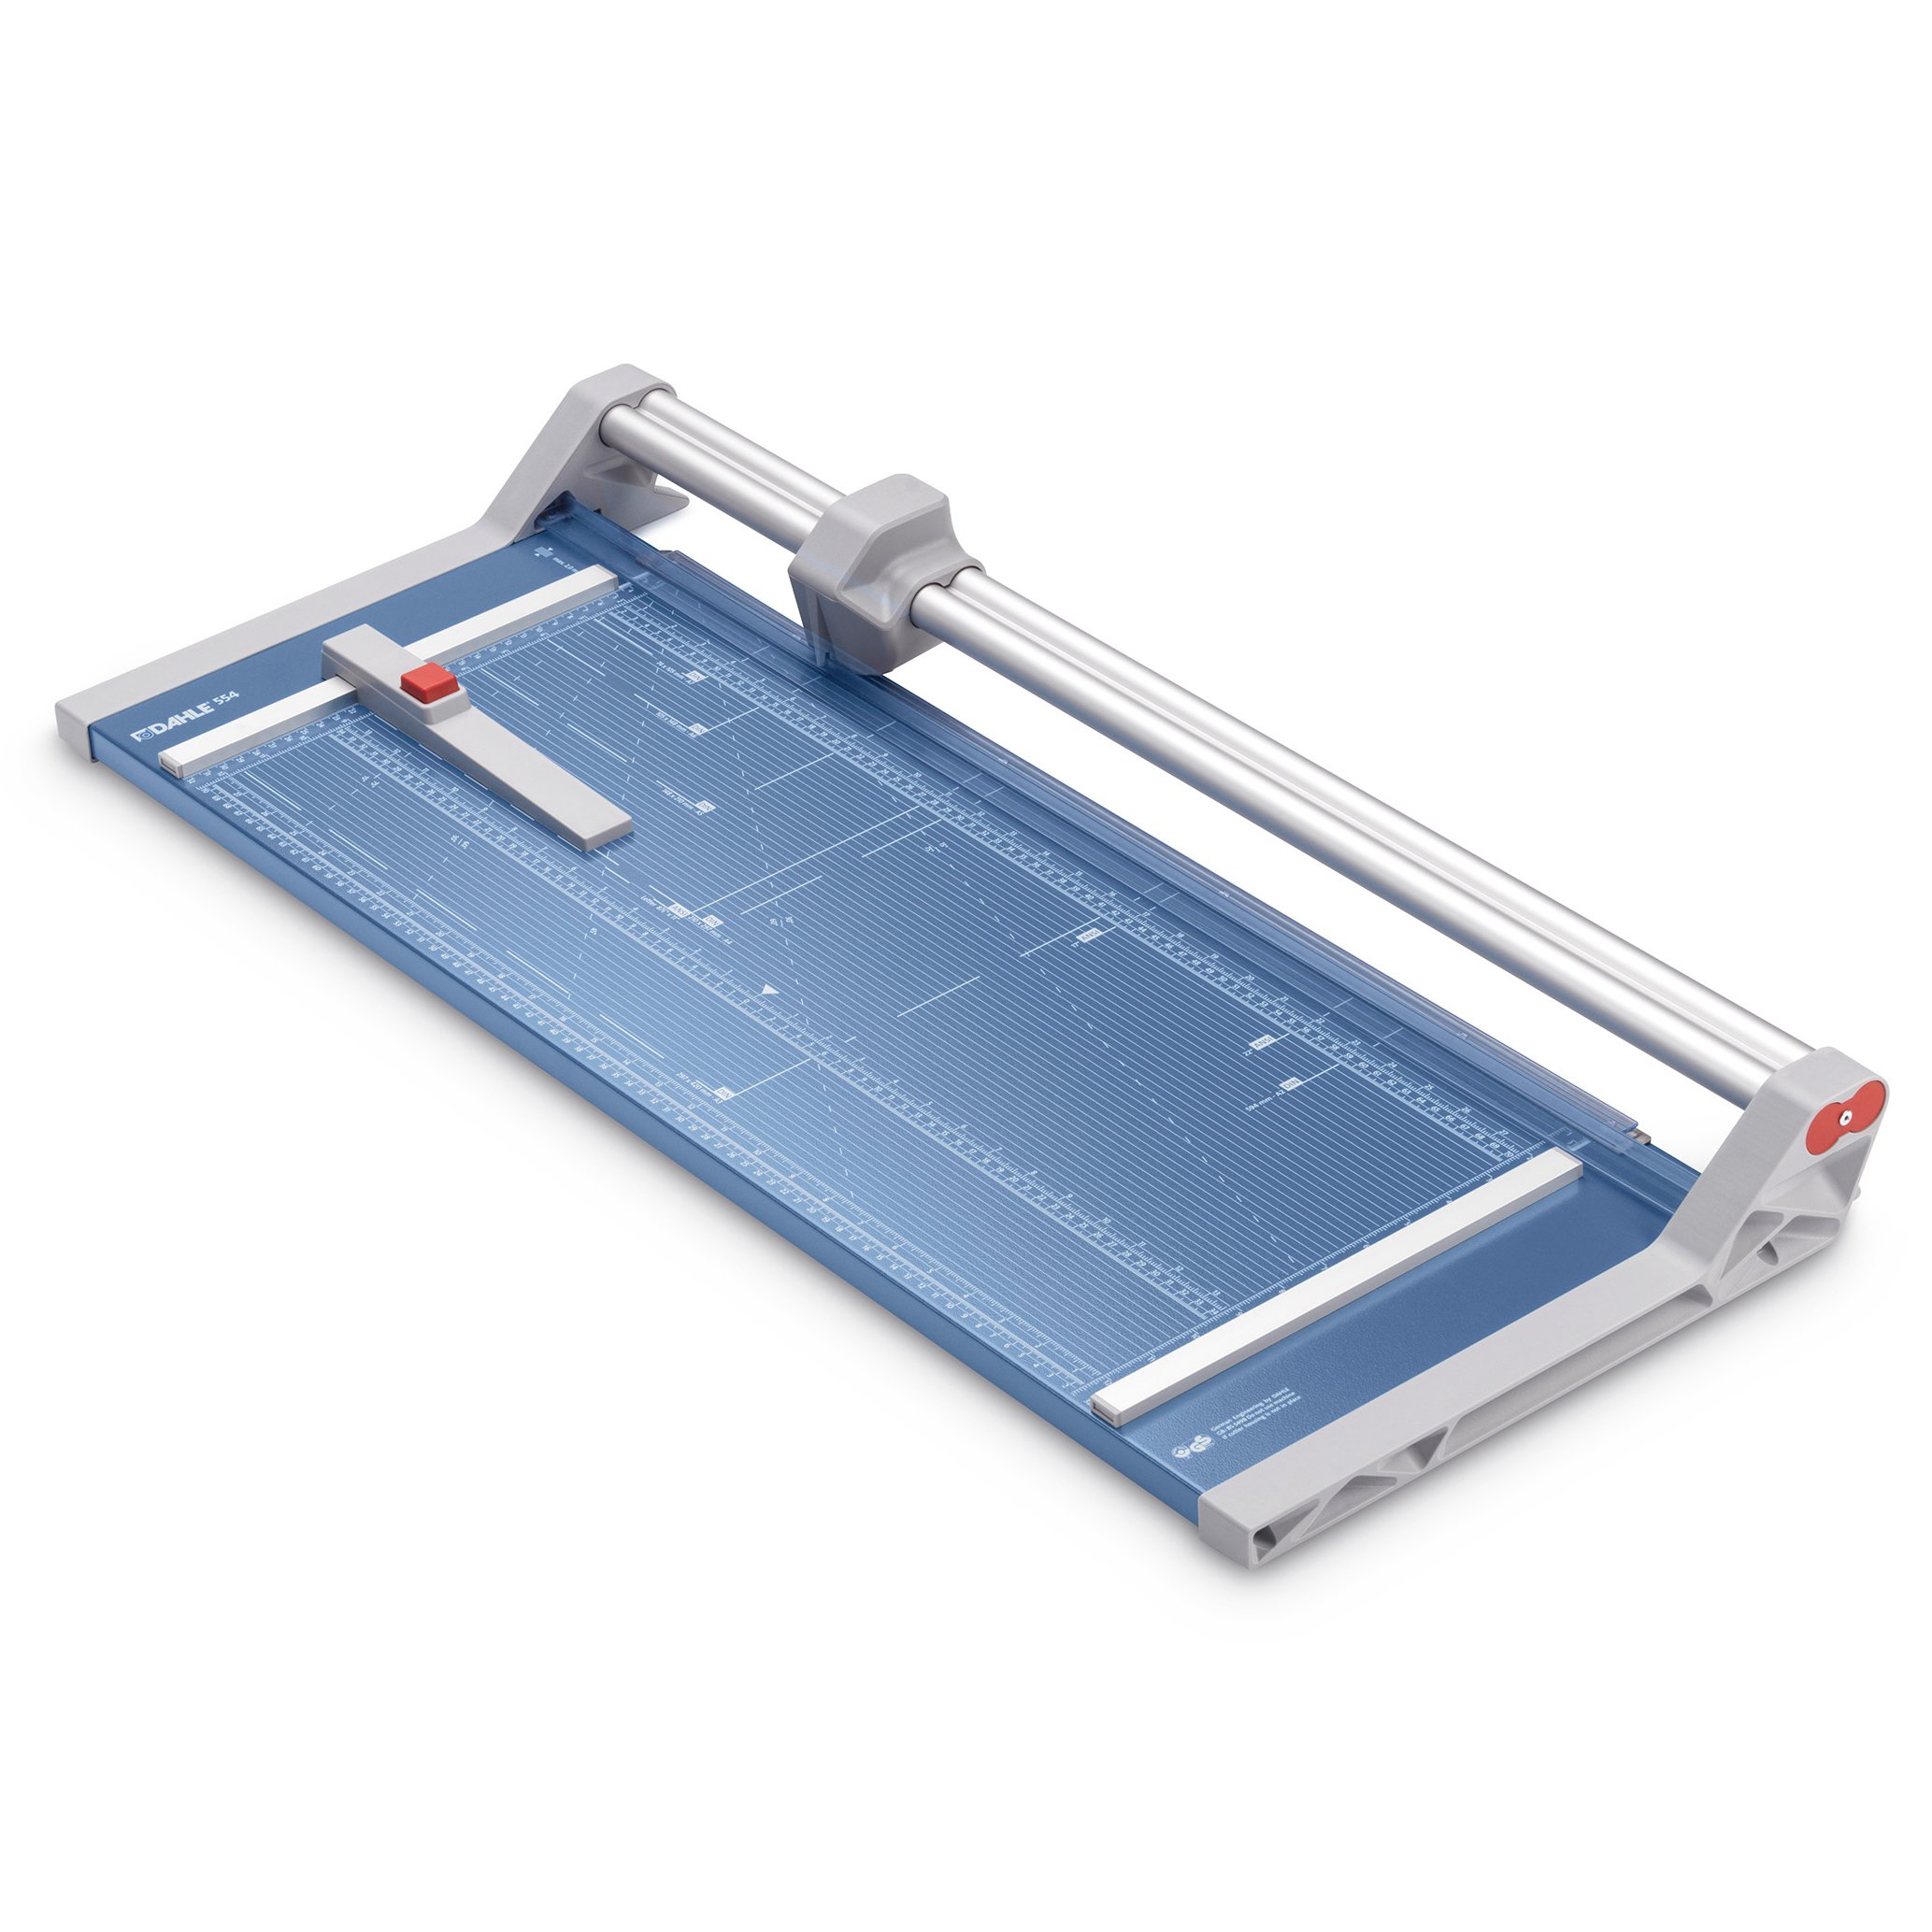 Dahle 554 A2 Professional Rotary Trimmer - Gen3 (20 Sheet) - Click Image to Close